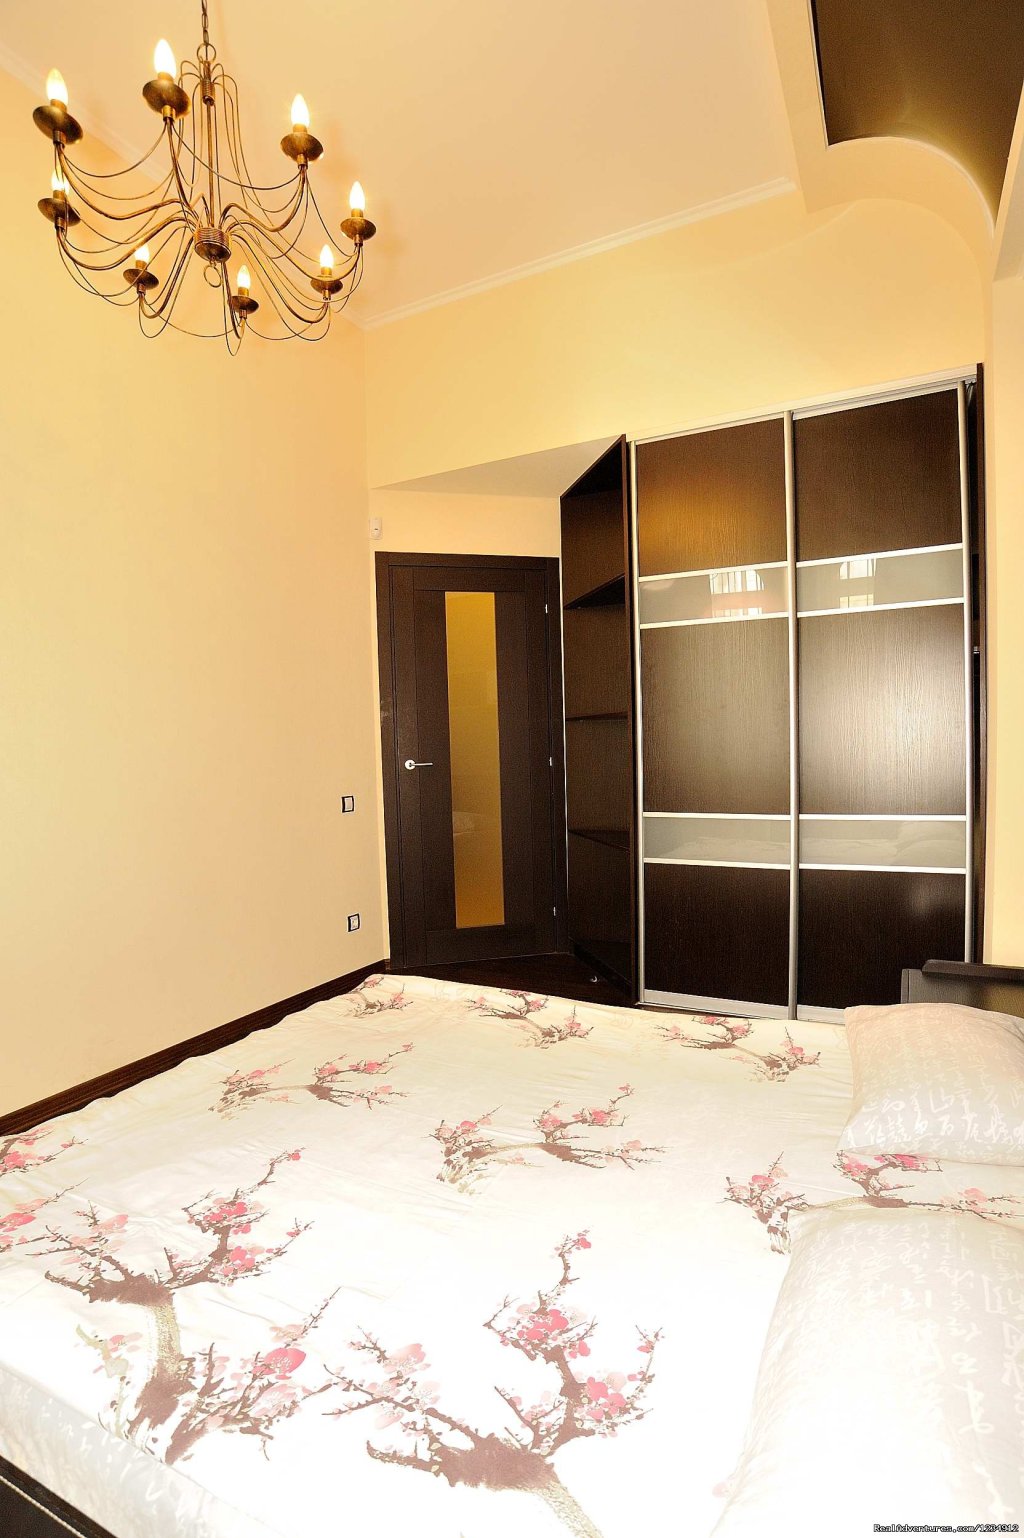 VIP 3room/2 bedroom apartment in the heart of Kiev | Image #12/24 | 